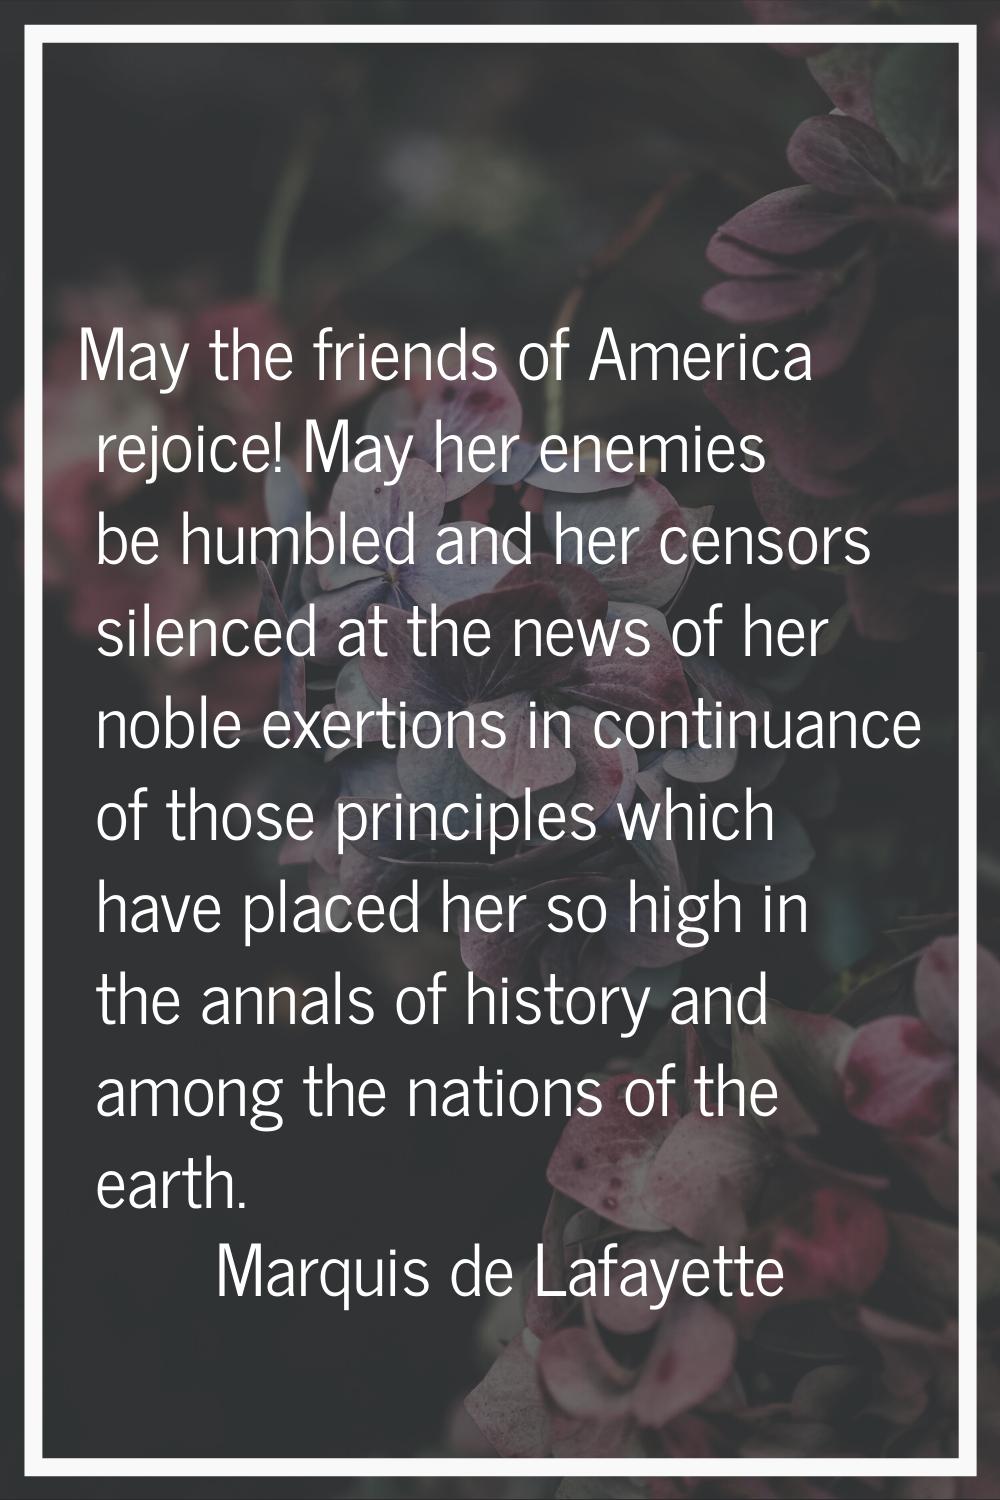 May the friends of America rejoice! May her enemies be humbled and her censors silenced at the news